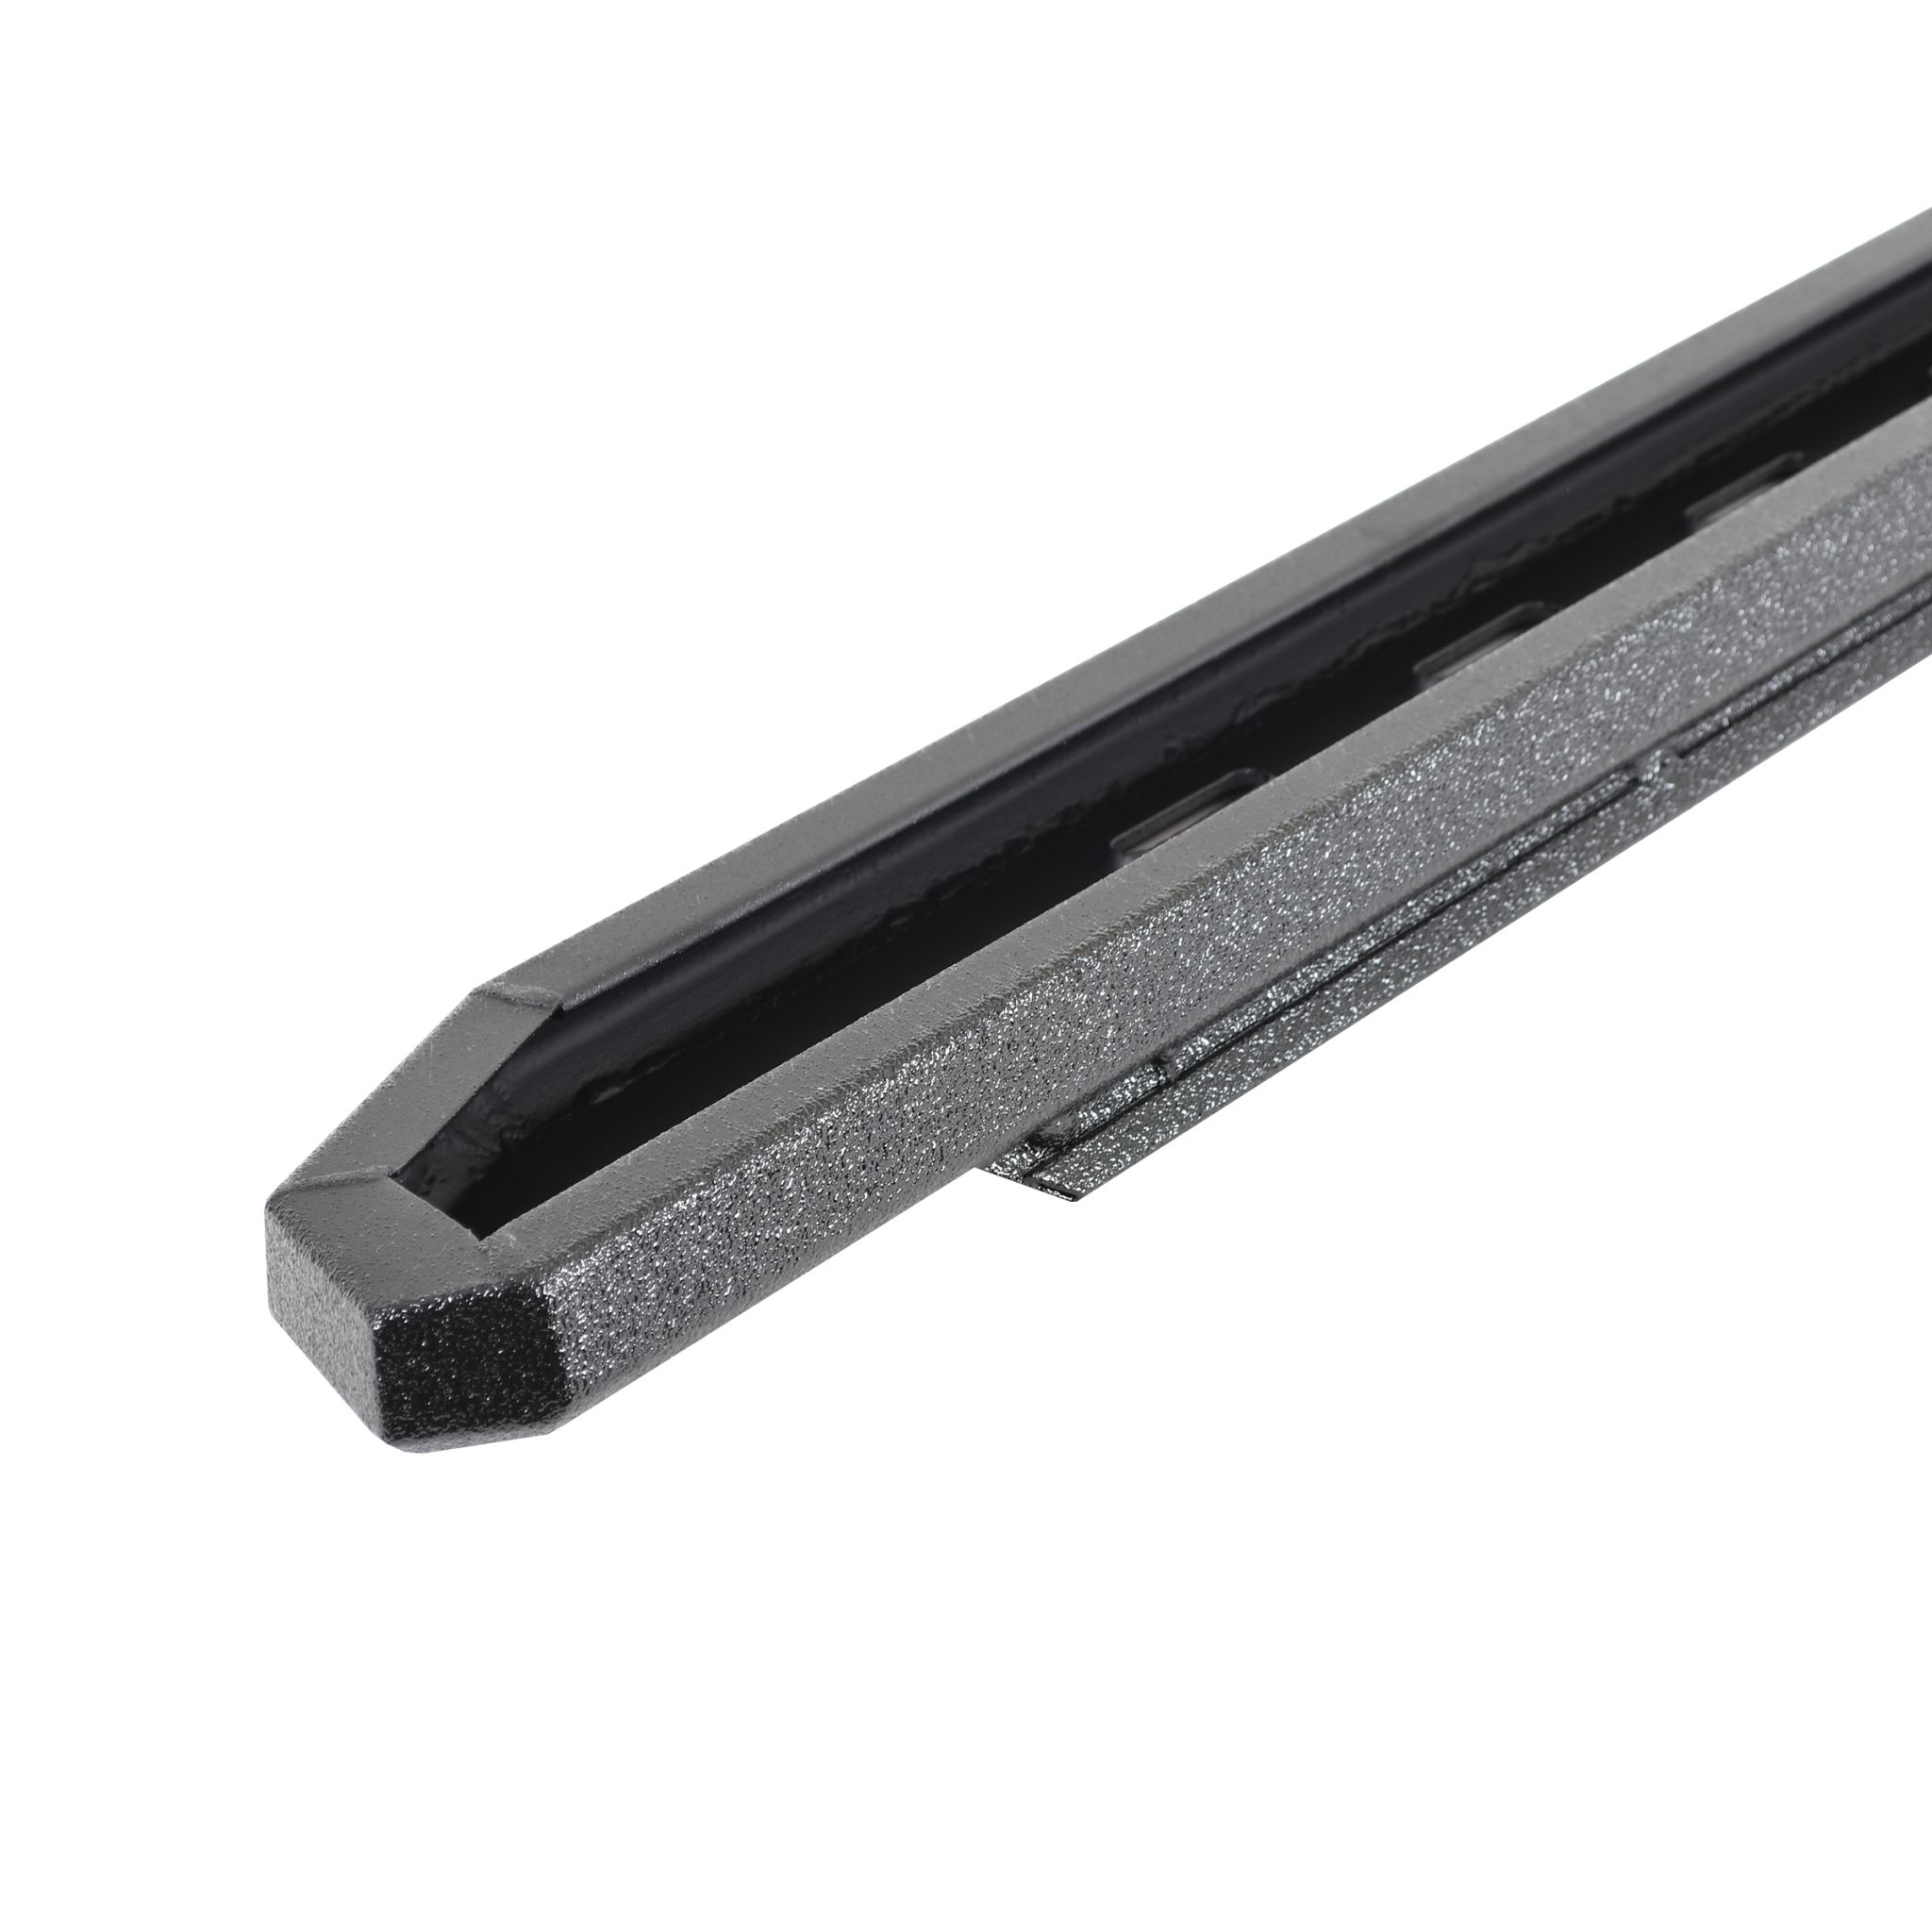 Go Rhino 69620687ST - RB30 Slim Line Running Boards with Mounting Bracket Kit - Protective Bedliner Coating